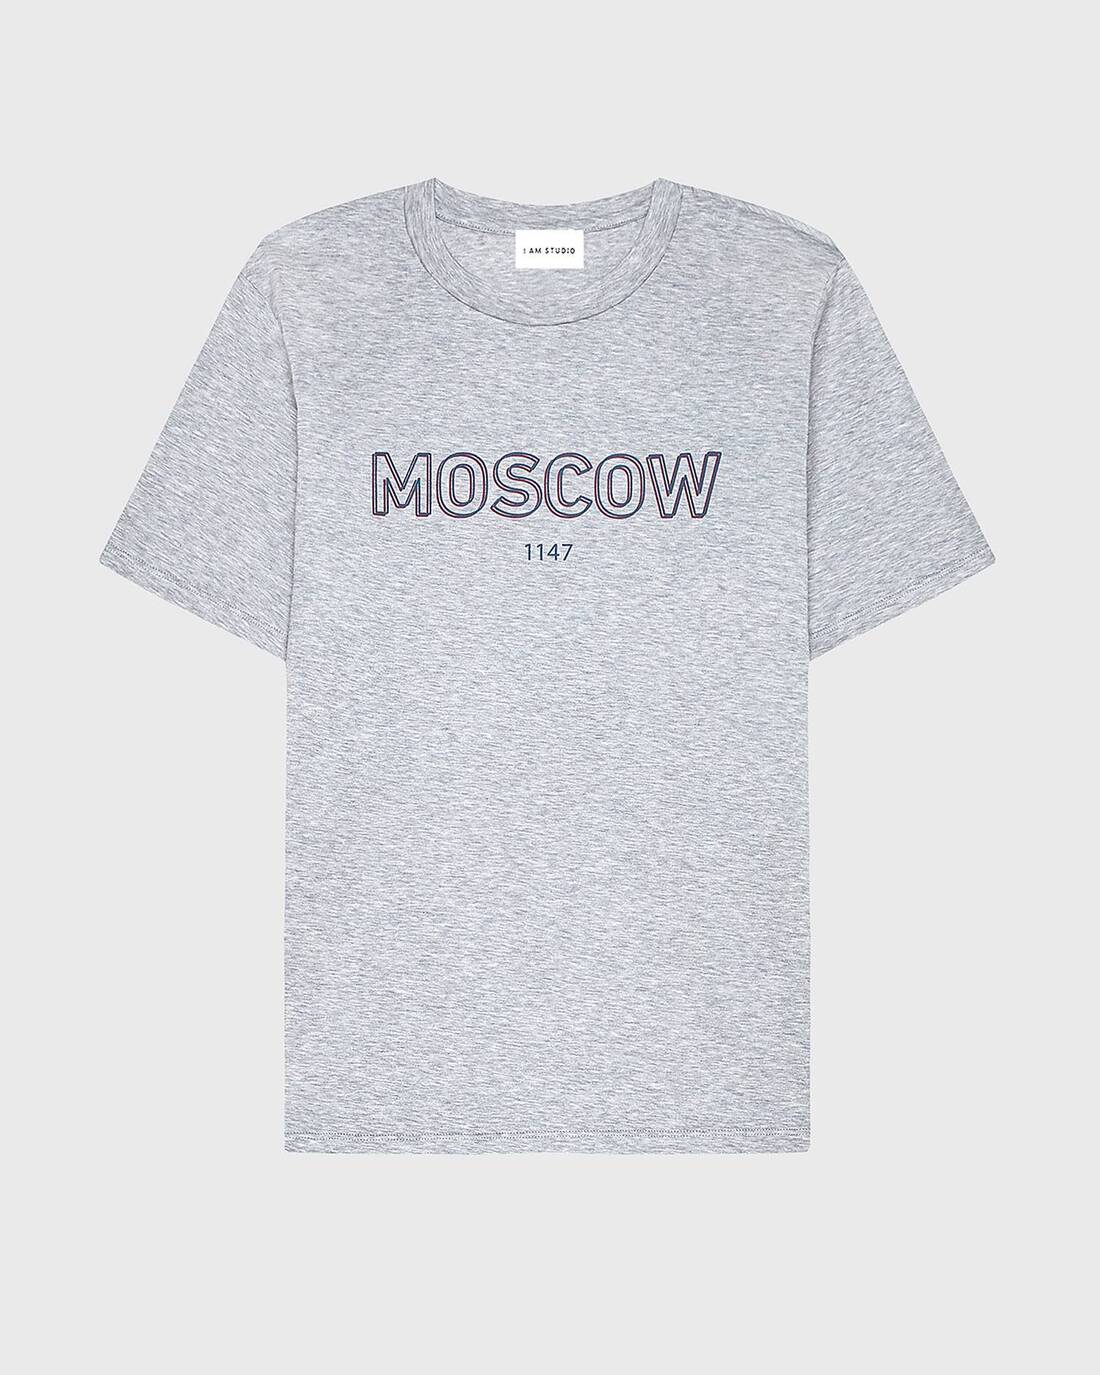 Moscow t-shirt